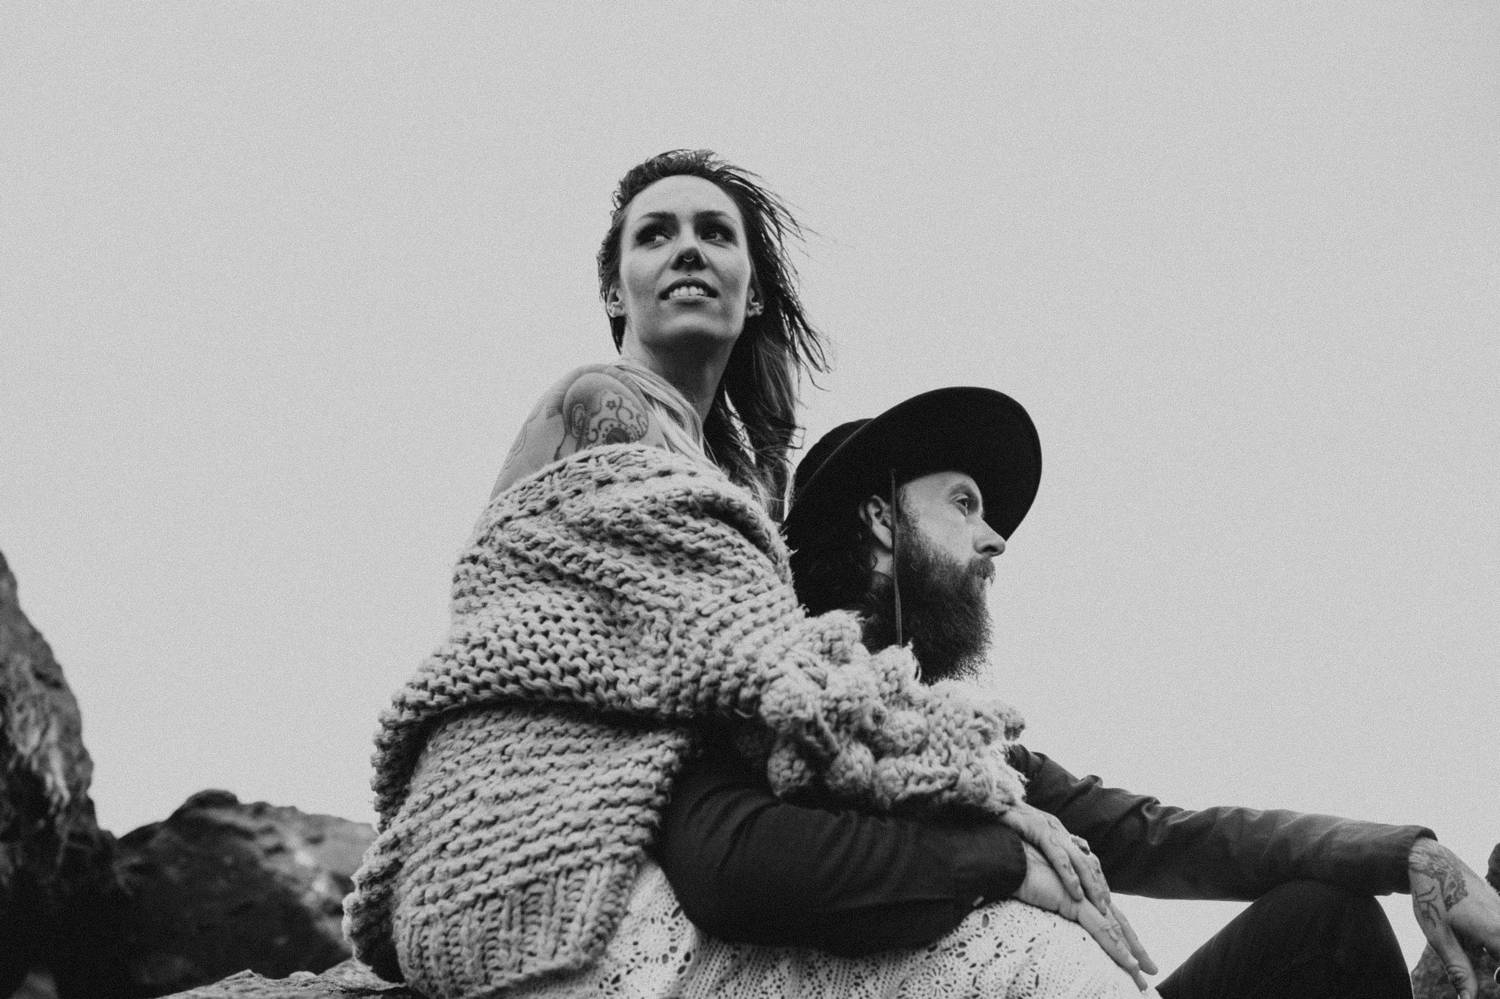 A woman in an oversized sweater sits behind a man with a beard as they sit outside against a gray sky.